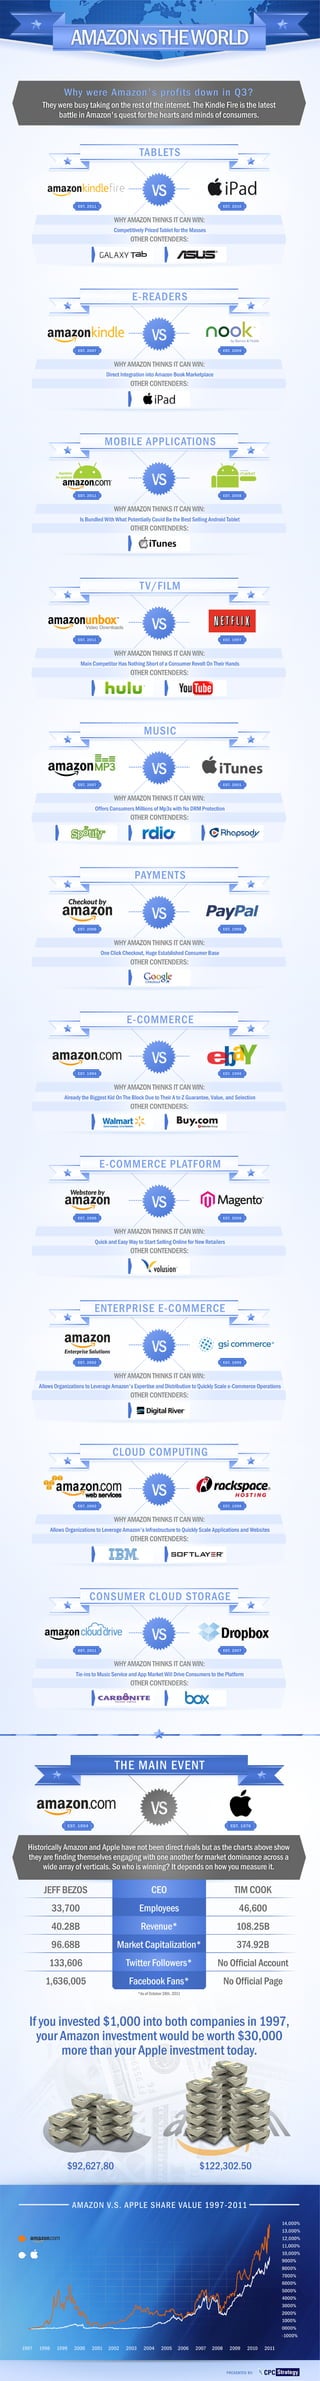 Amazon v. the world   an infographic detailing amazon's growing number of product lines and main competitors